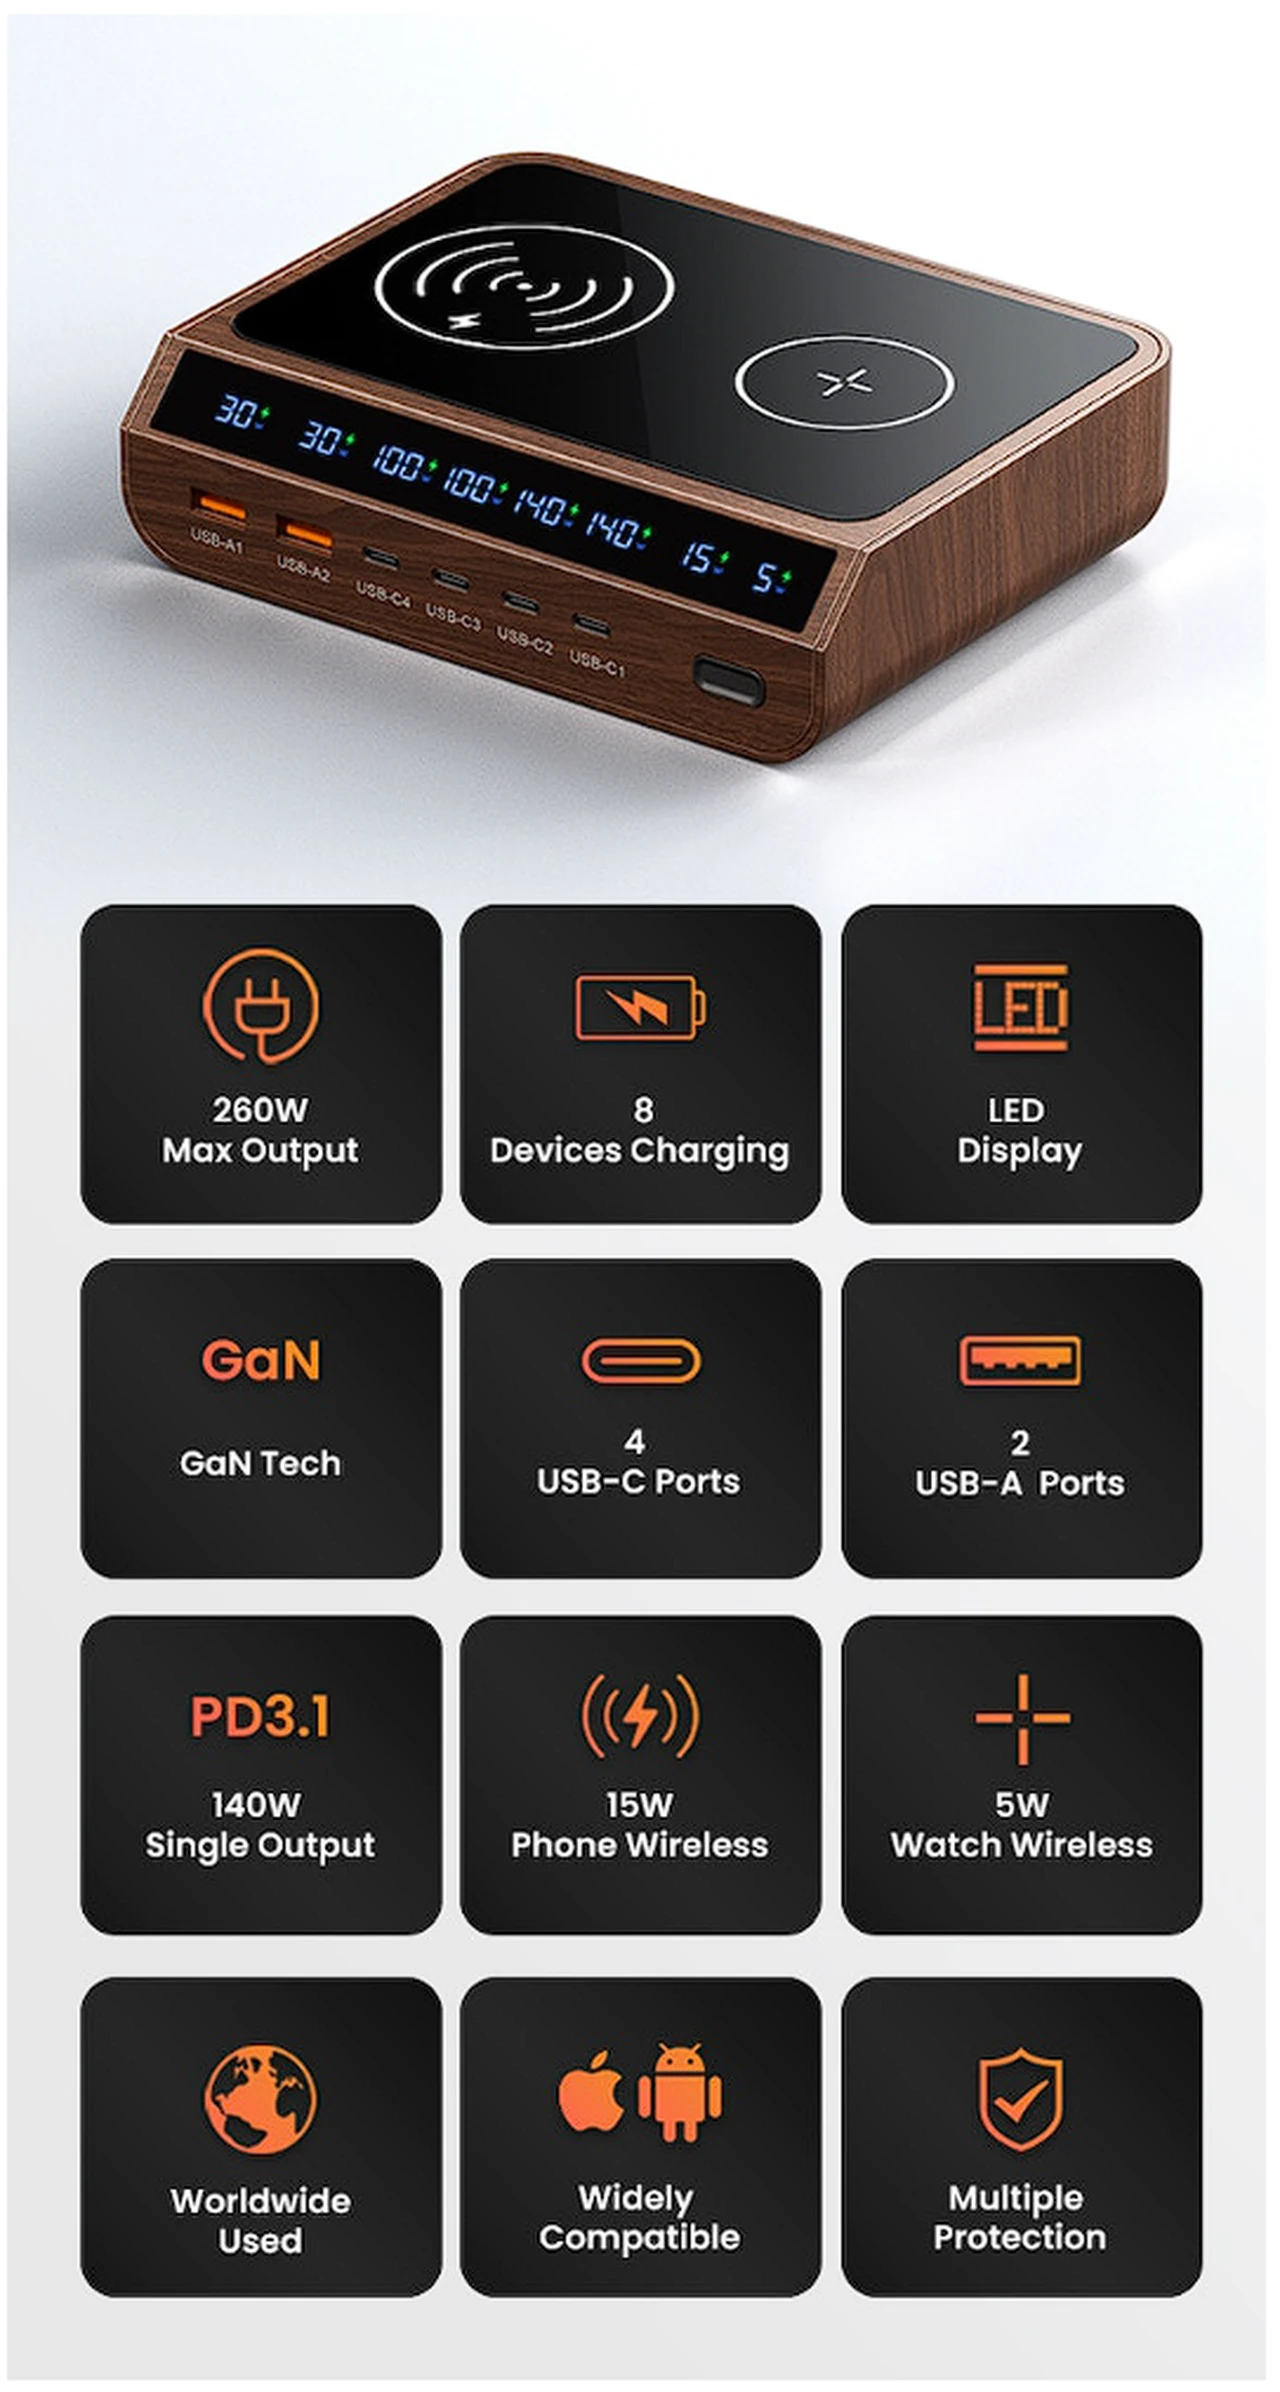 Chagdin 260w charging station features